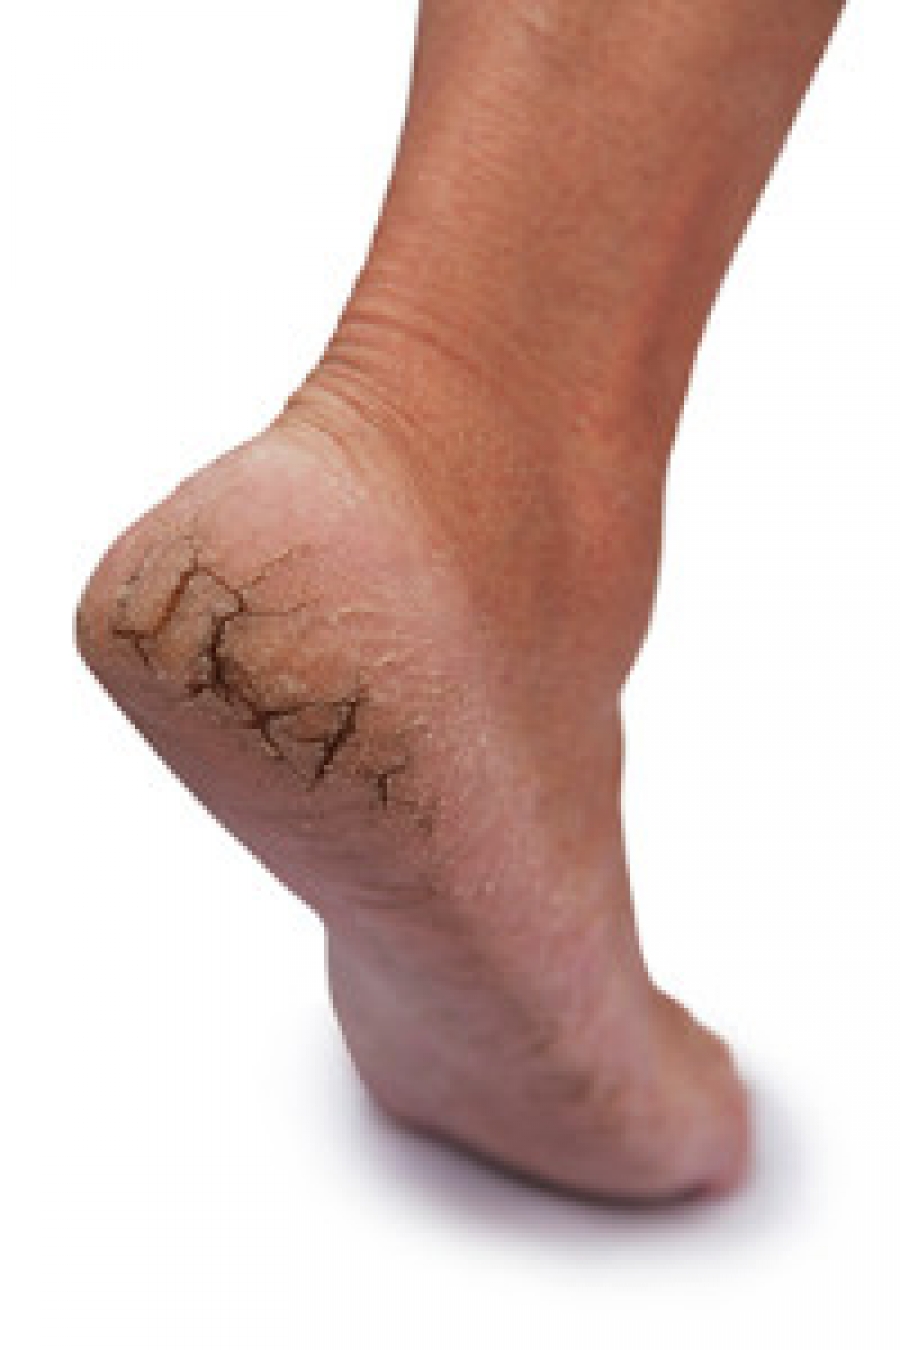 Why should you use foot crack creams for your cracked heels?